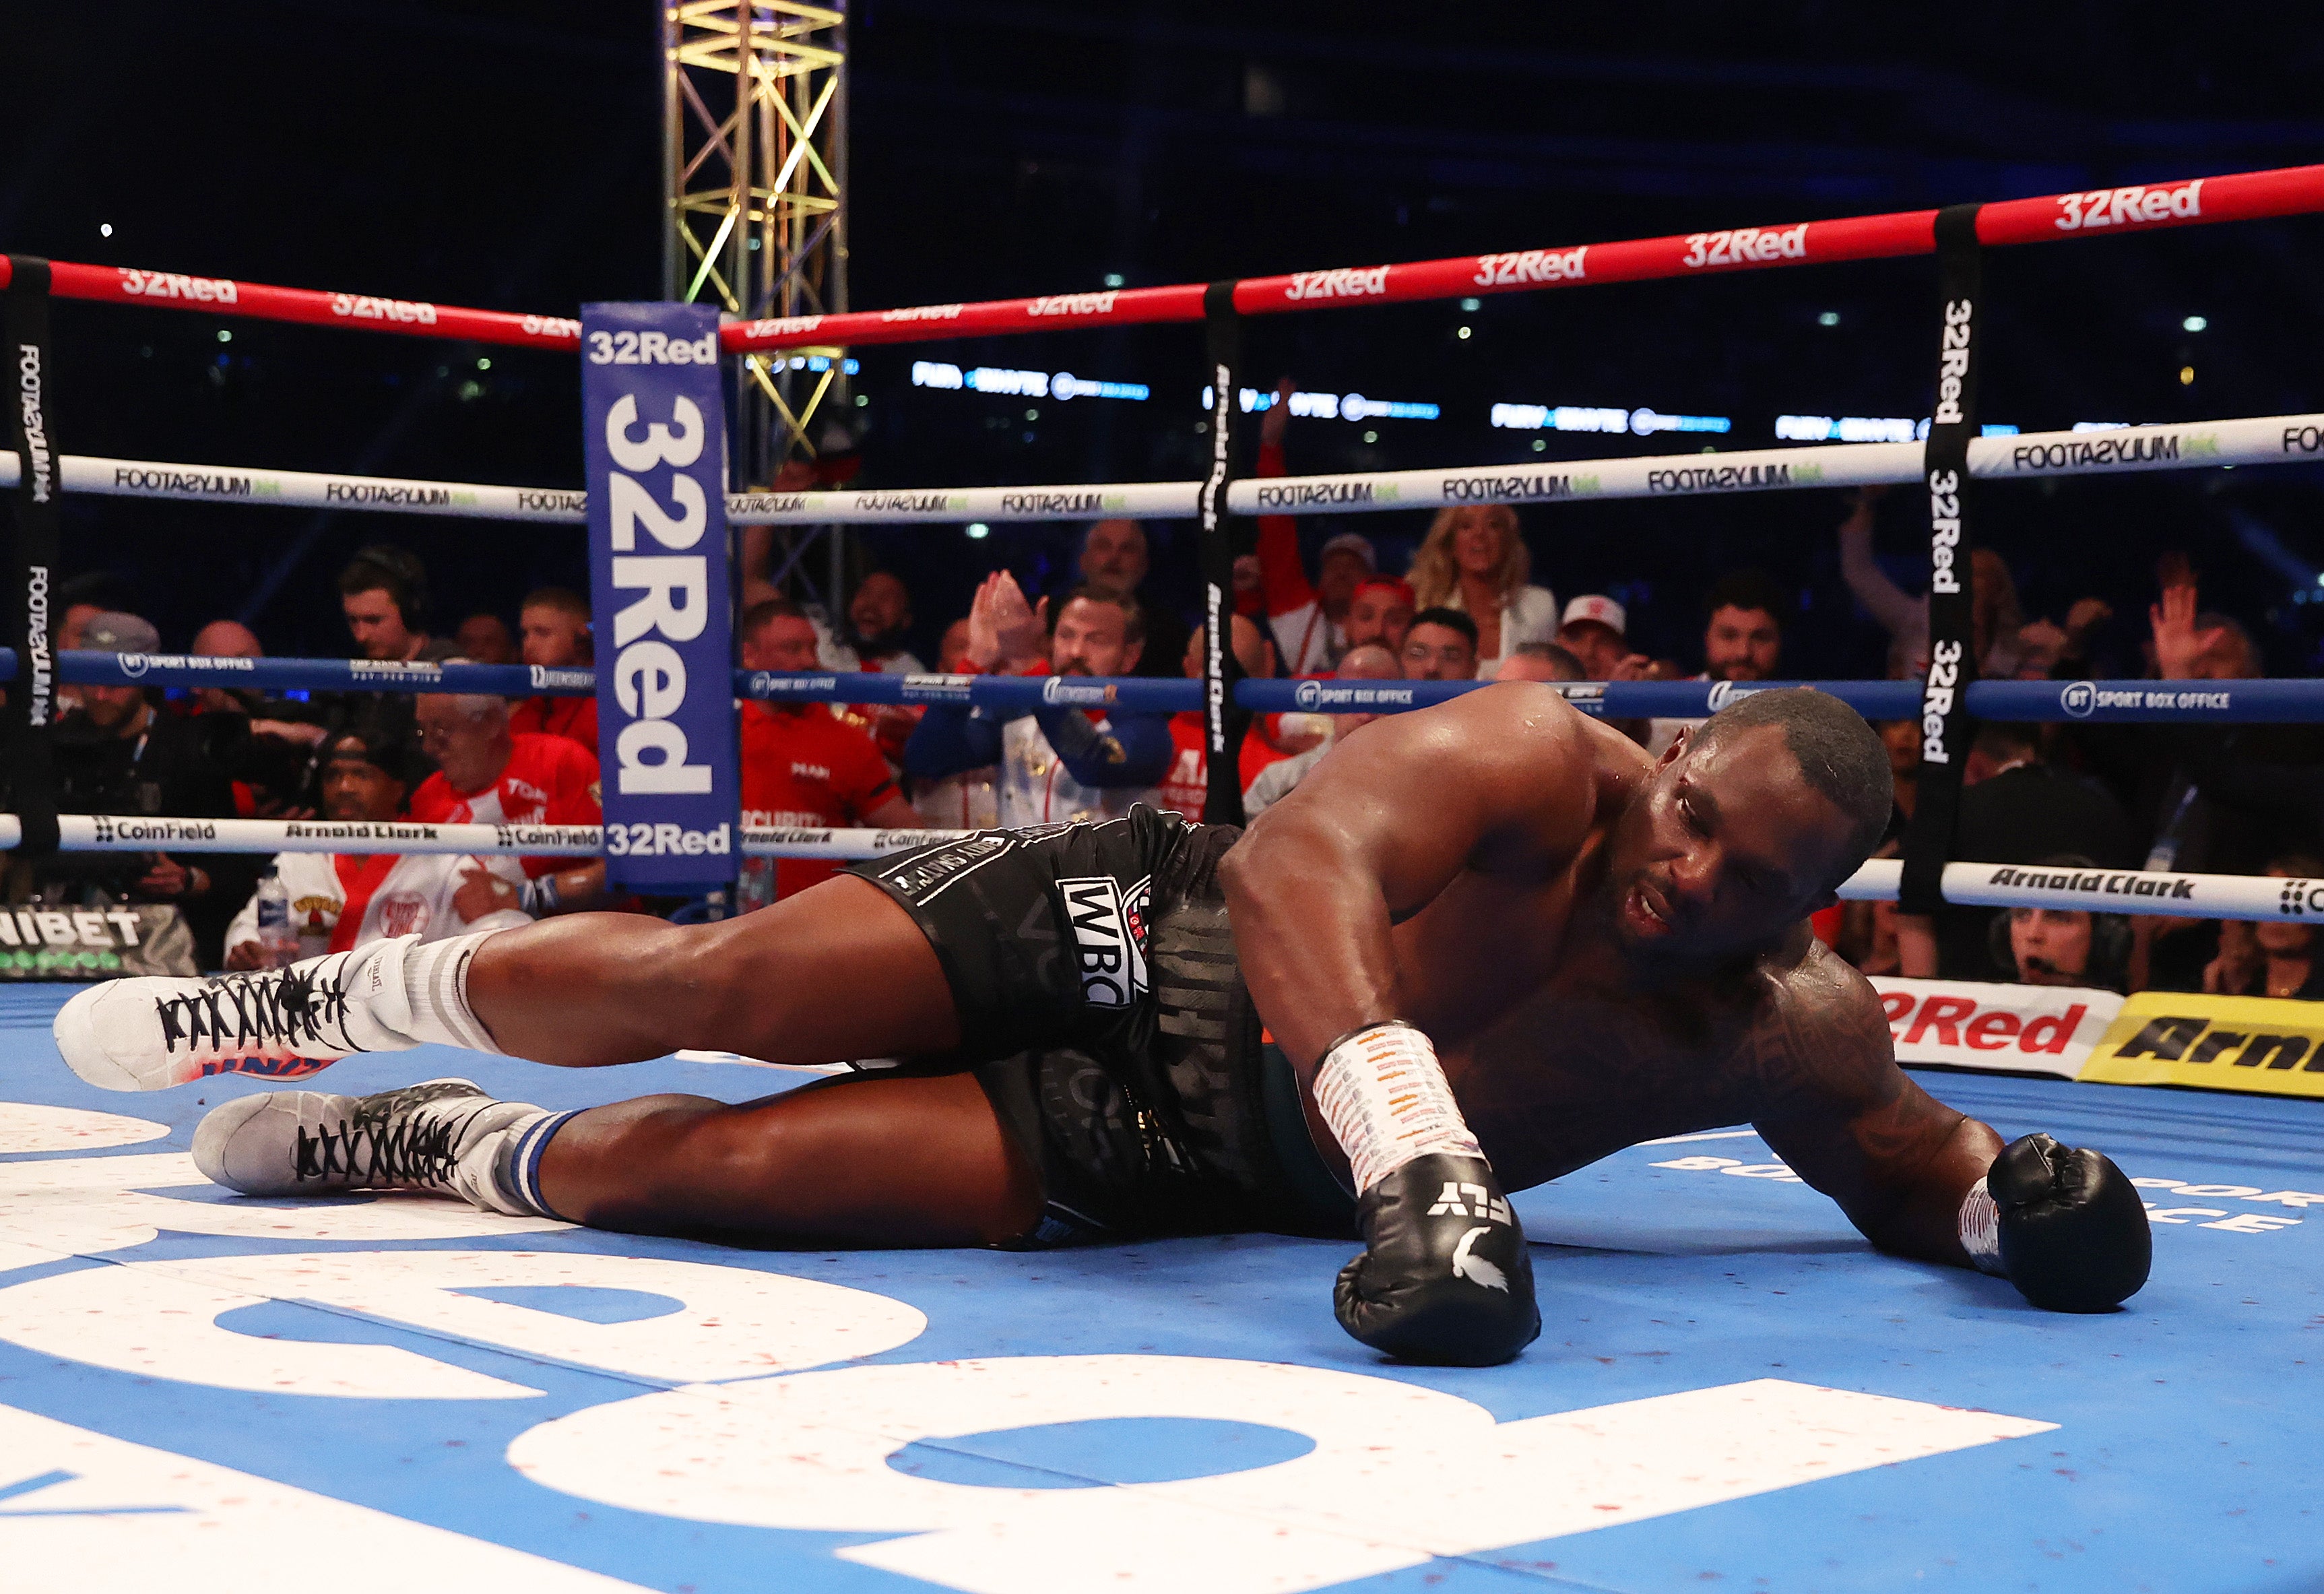 Dillian Whyte was stopped by Tyson Fury in Round 6